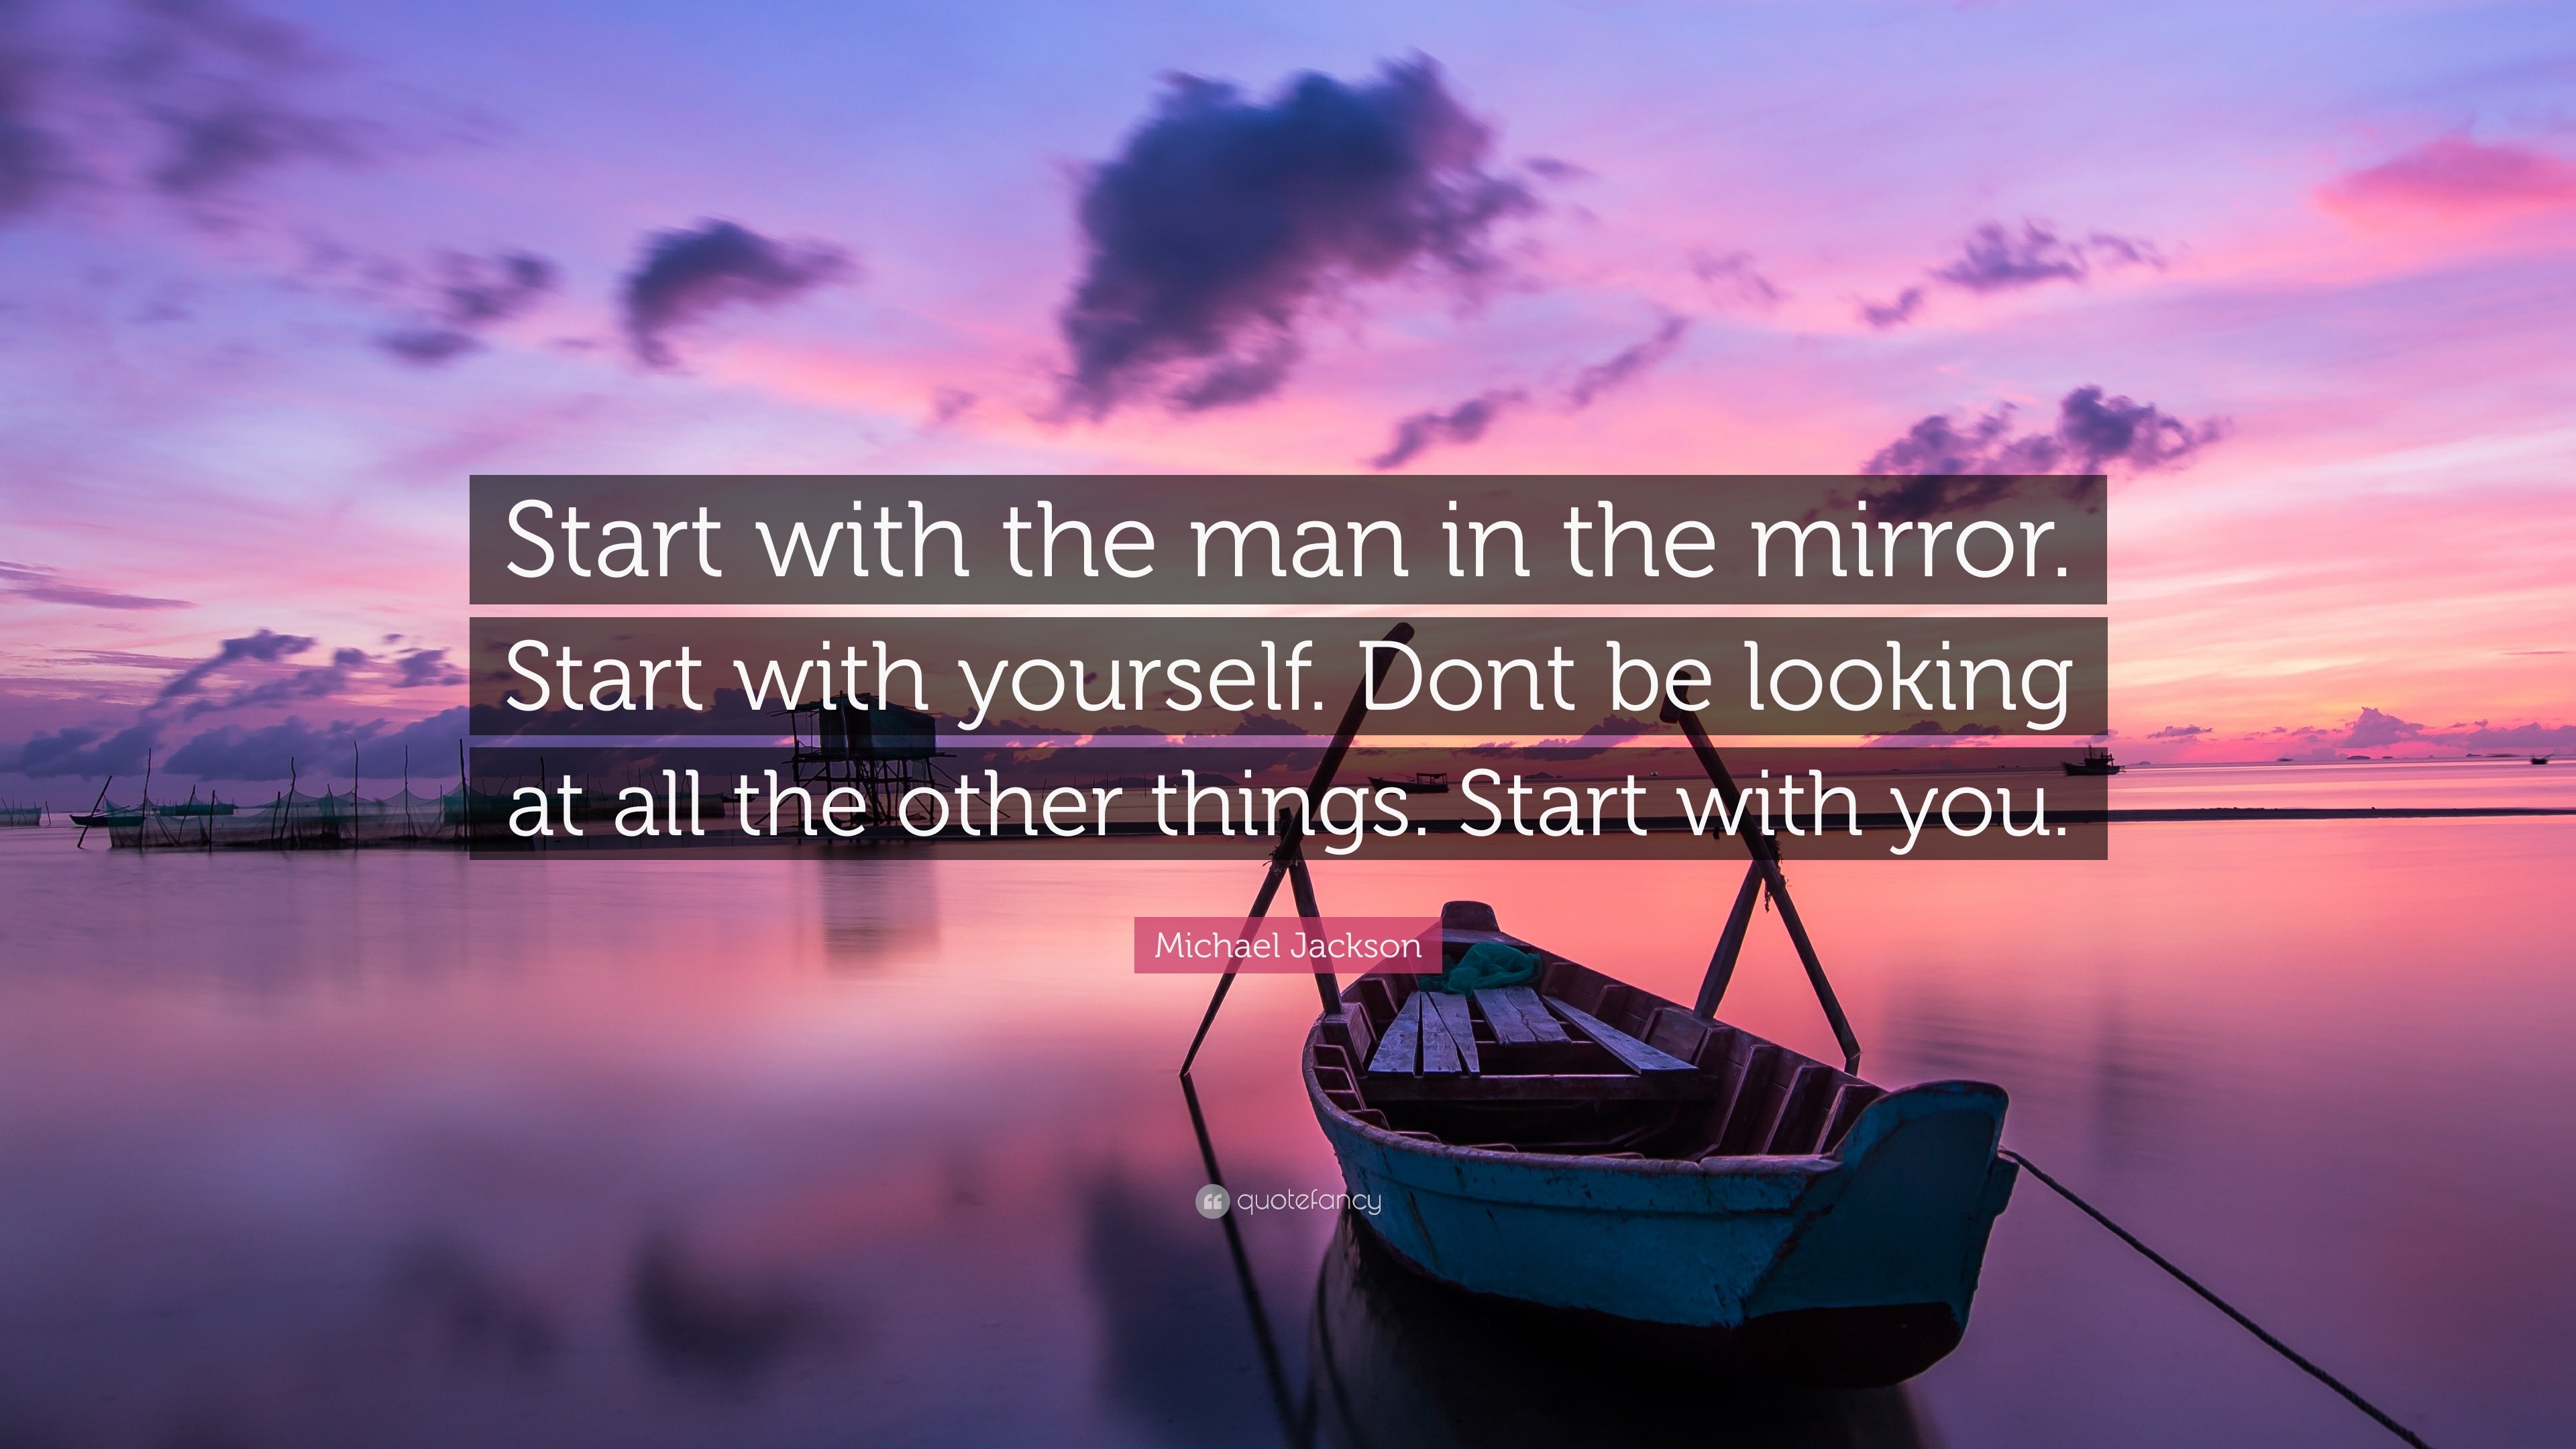 Michael Jackson Quote: "Start with the man in the mirror. Start with yourself. Dont be looking ...